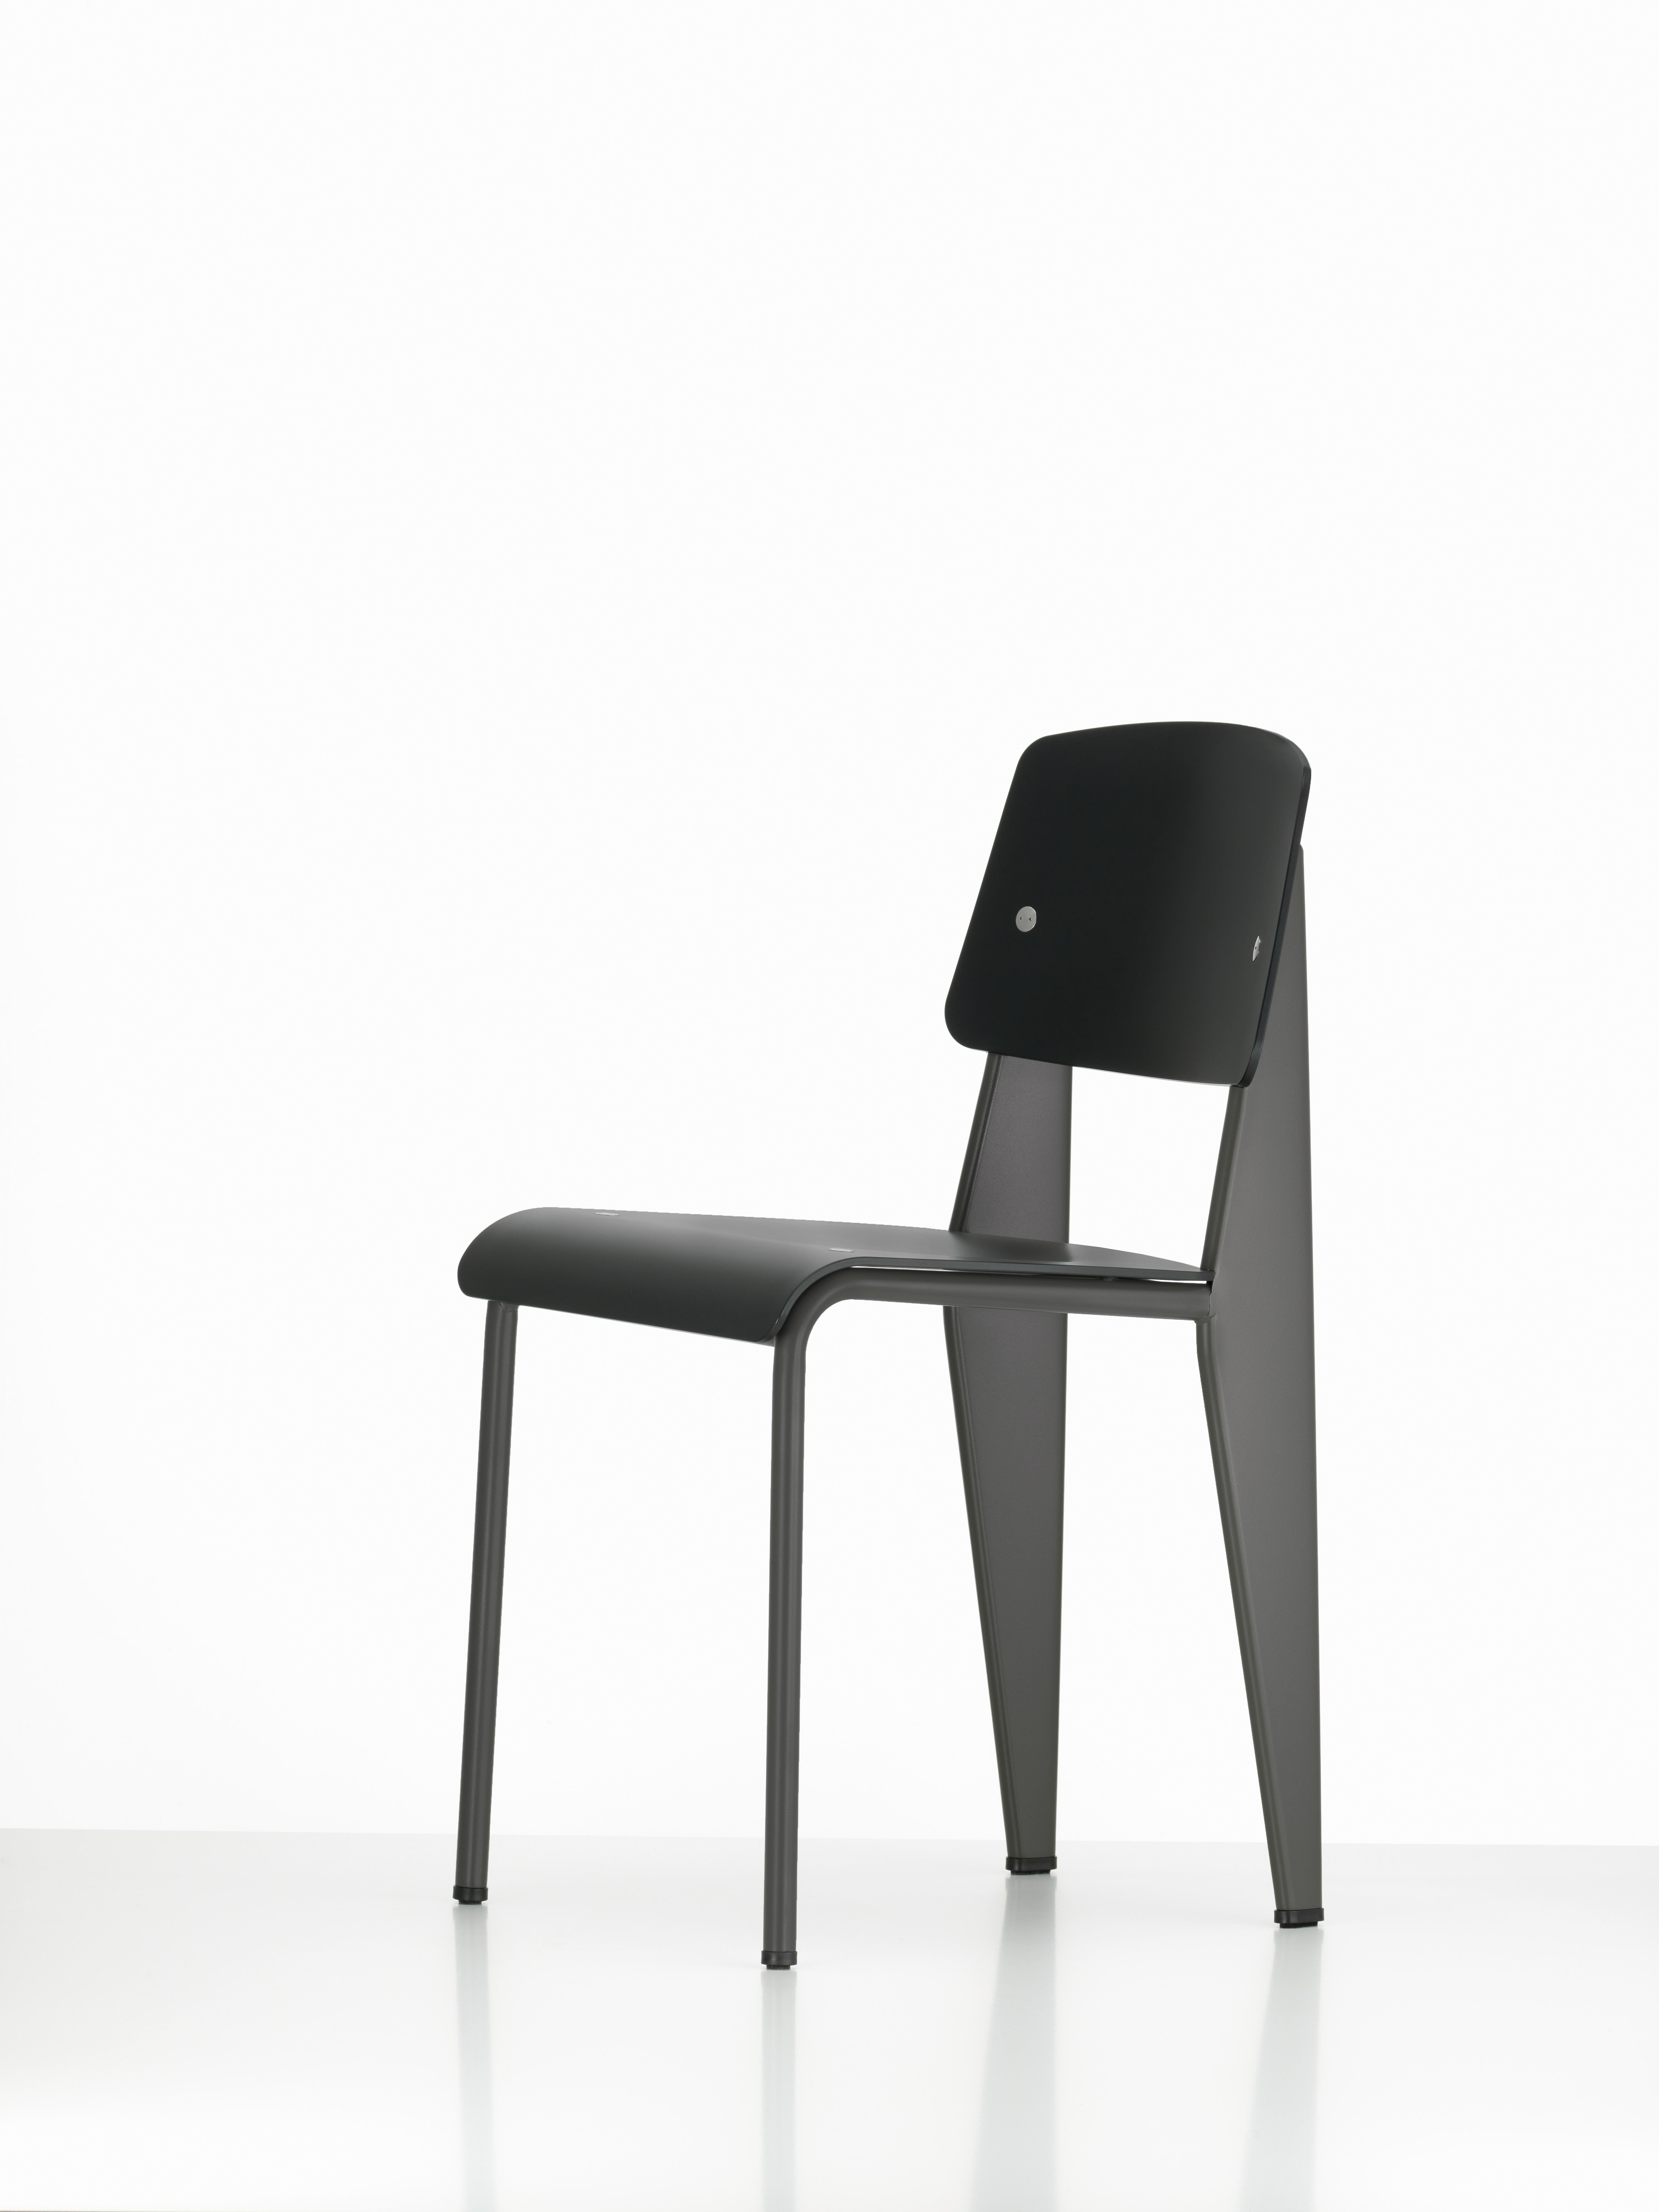 Modern Vitra Standard SP Chair in Deep Black and Basalt by Jean Prouvé For Sale